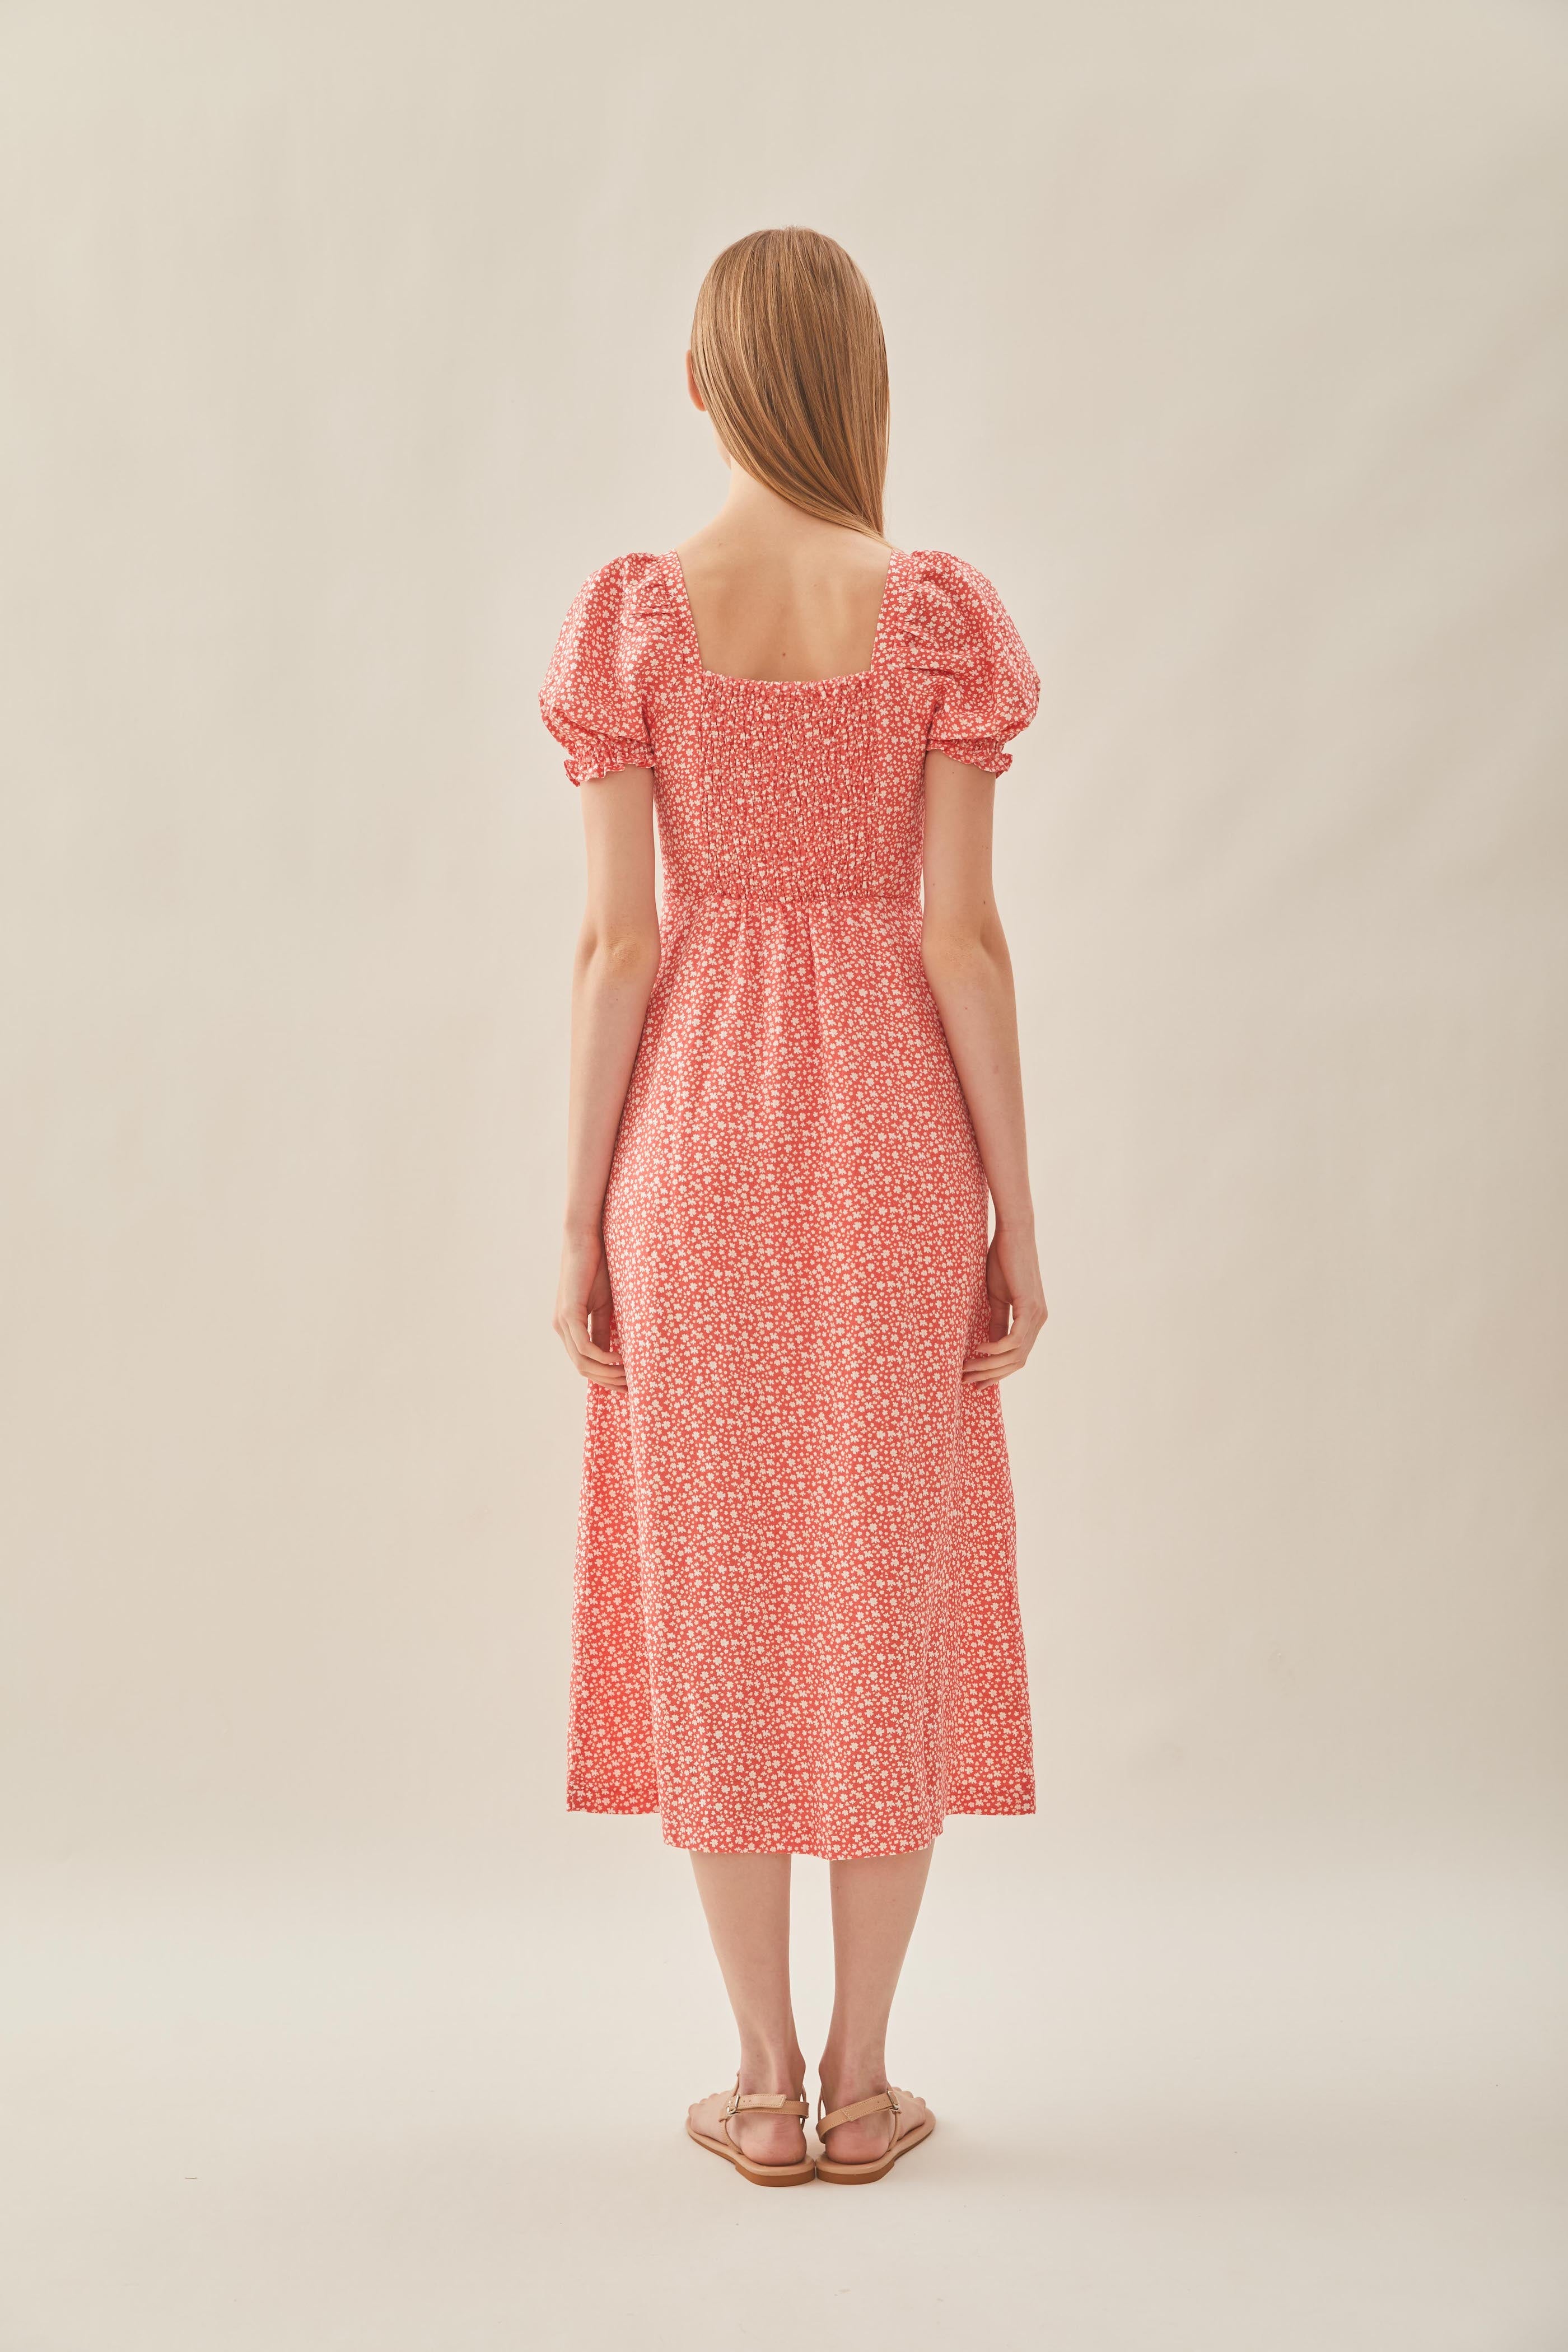 Puffed Sleeve Dress in Red Bloom